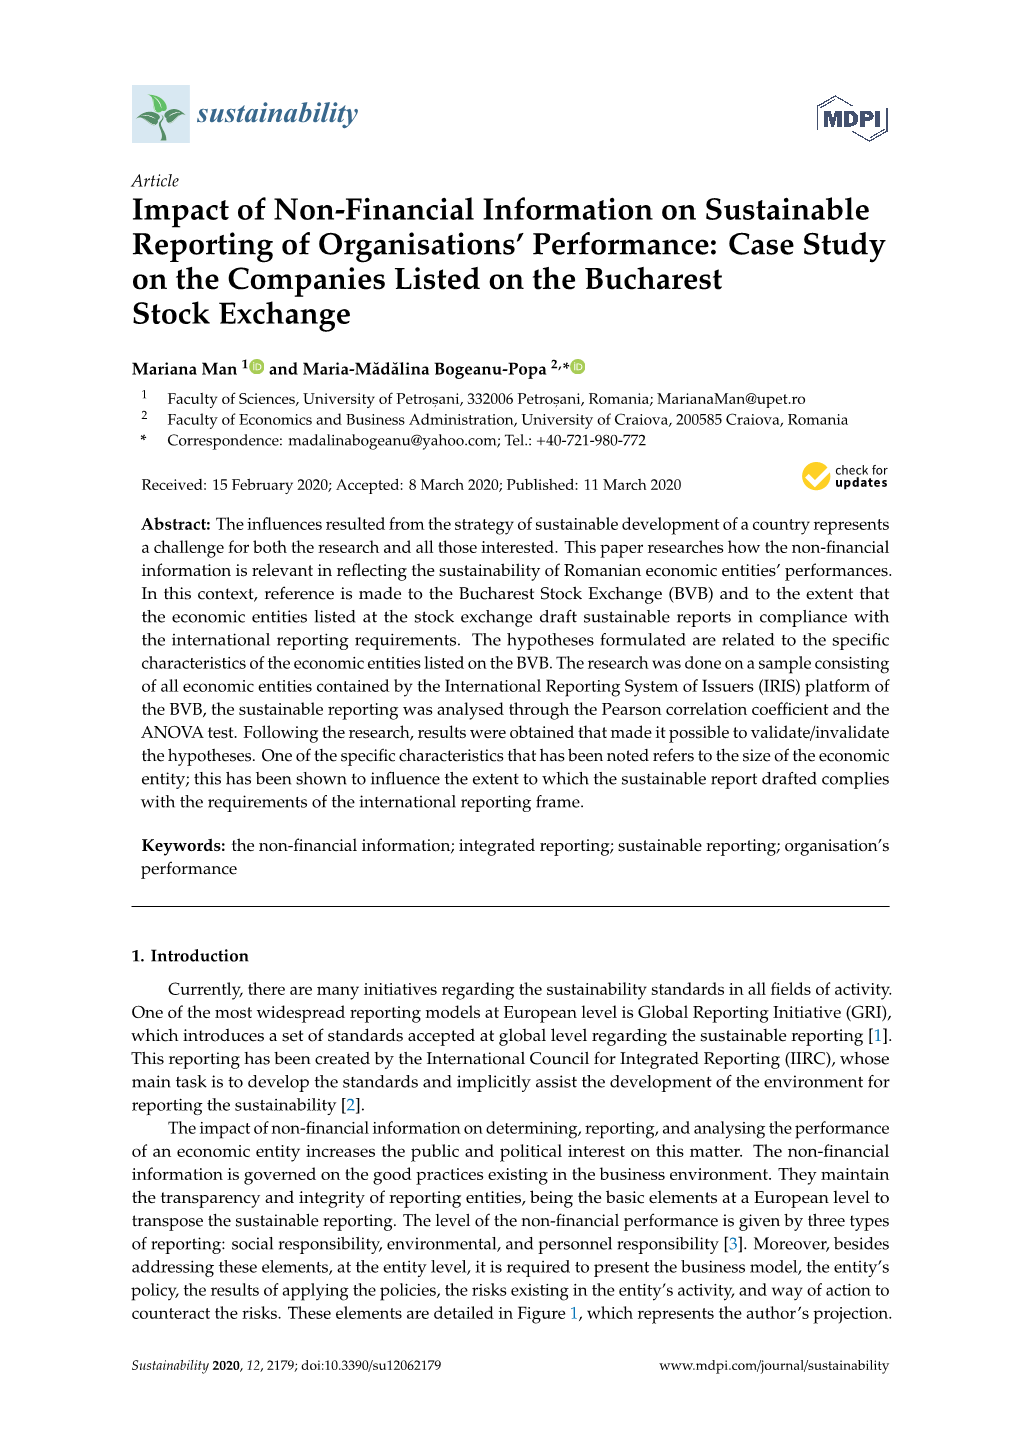 Impact of Non-Financial Information on Sustainable Reporting of Organisations’ Performance: Case Study on the Companies Listed on the Bucharest Stock Exchange